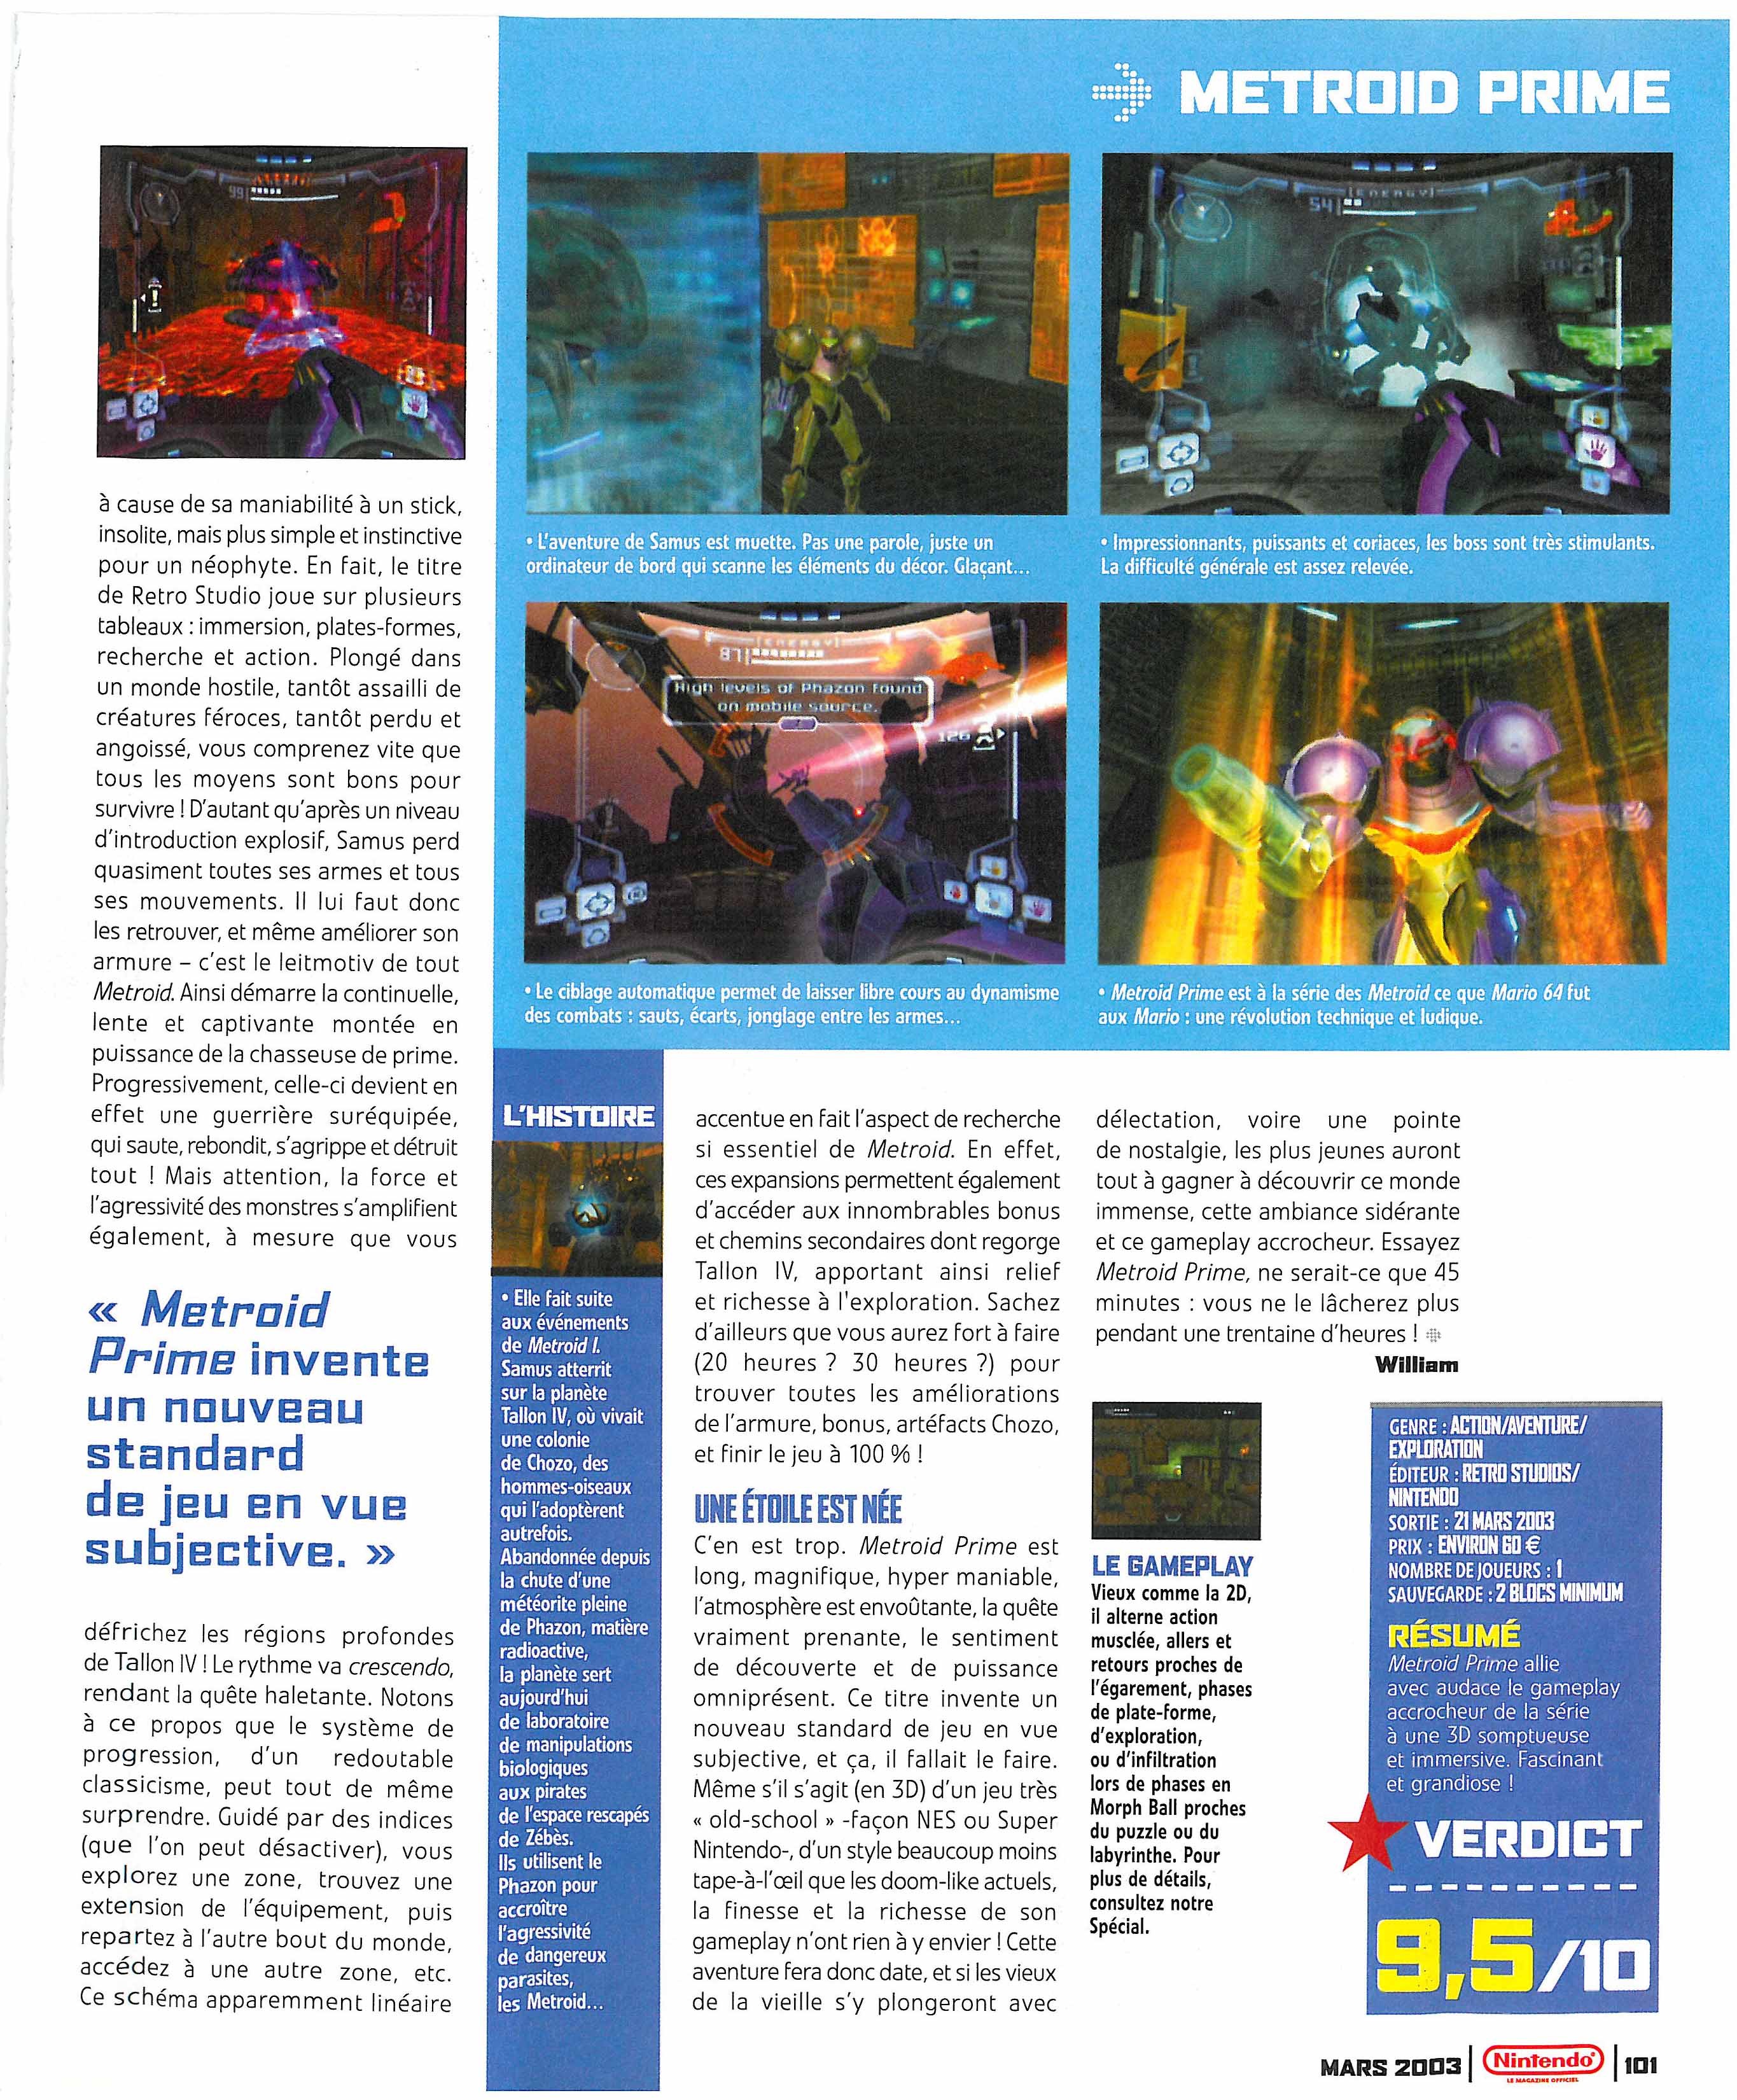 [TEST] Metroid Prime Remastered (Switch) Le%20Magazine%20Officiel%20Nintendo%20N%C2%B0010%20-%20Page%20101%20%28Mars%202003%29